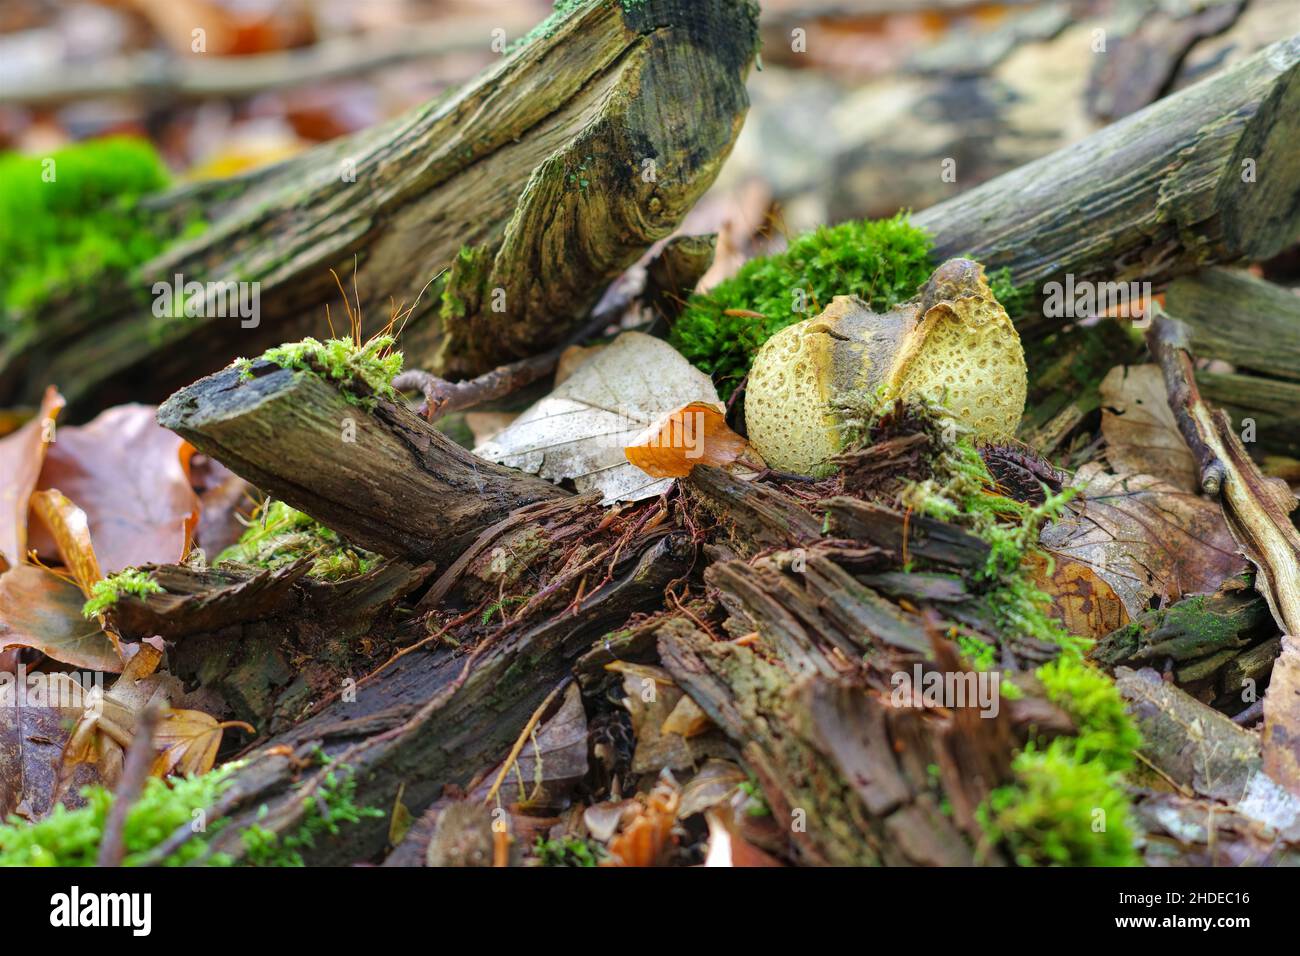 Scleroderma or eart ball in autumn forest Stock Photo